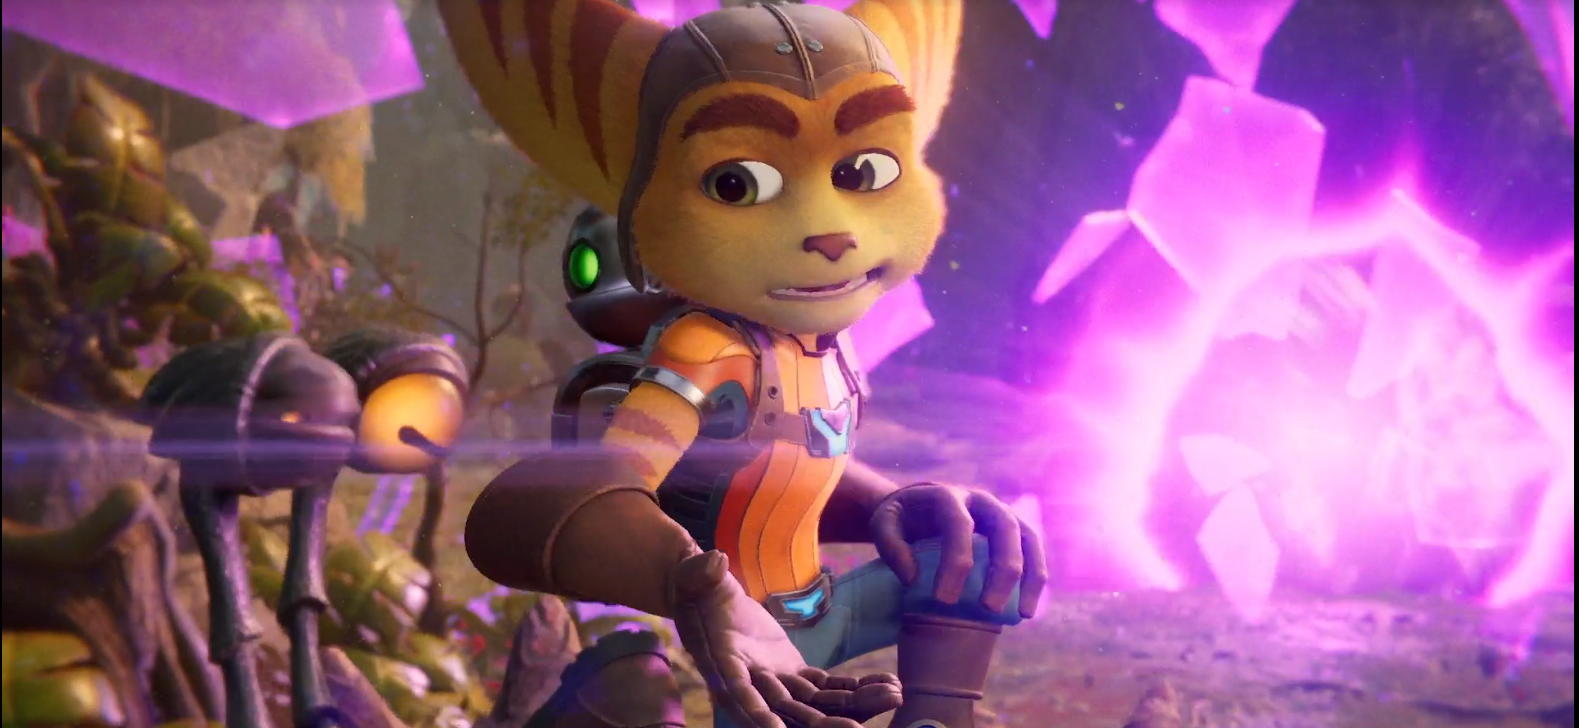 PS5, Ratchet and Clank, Insomniac